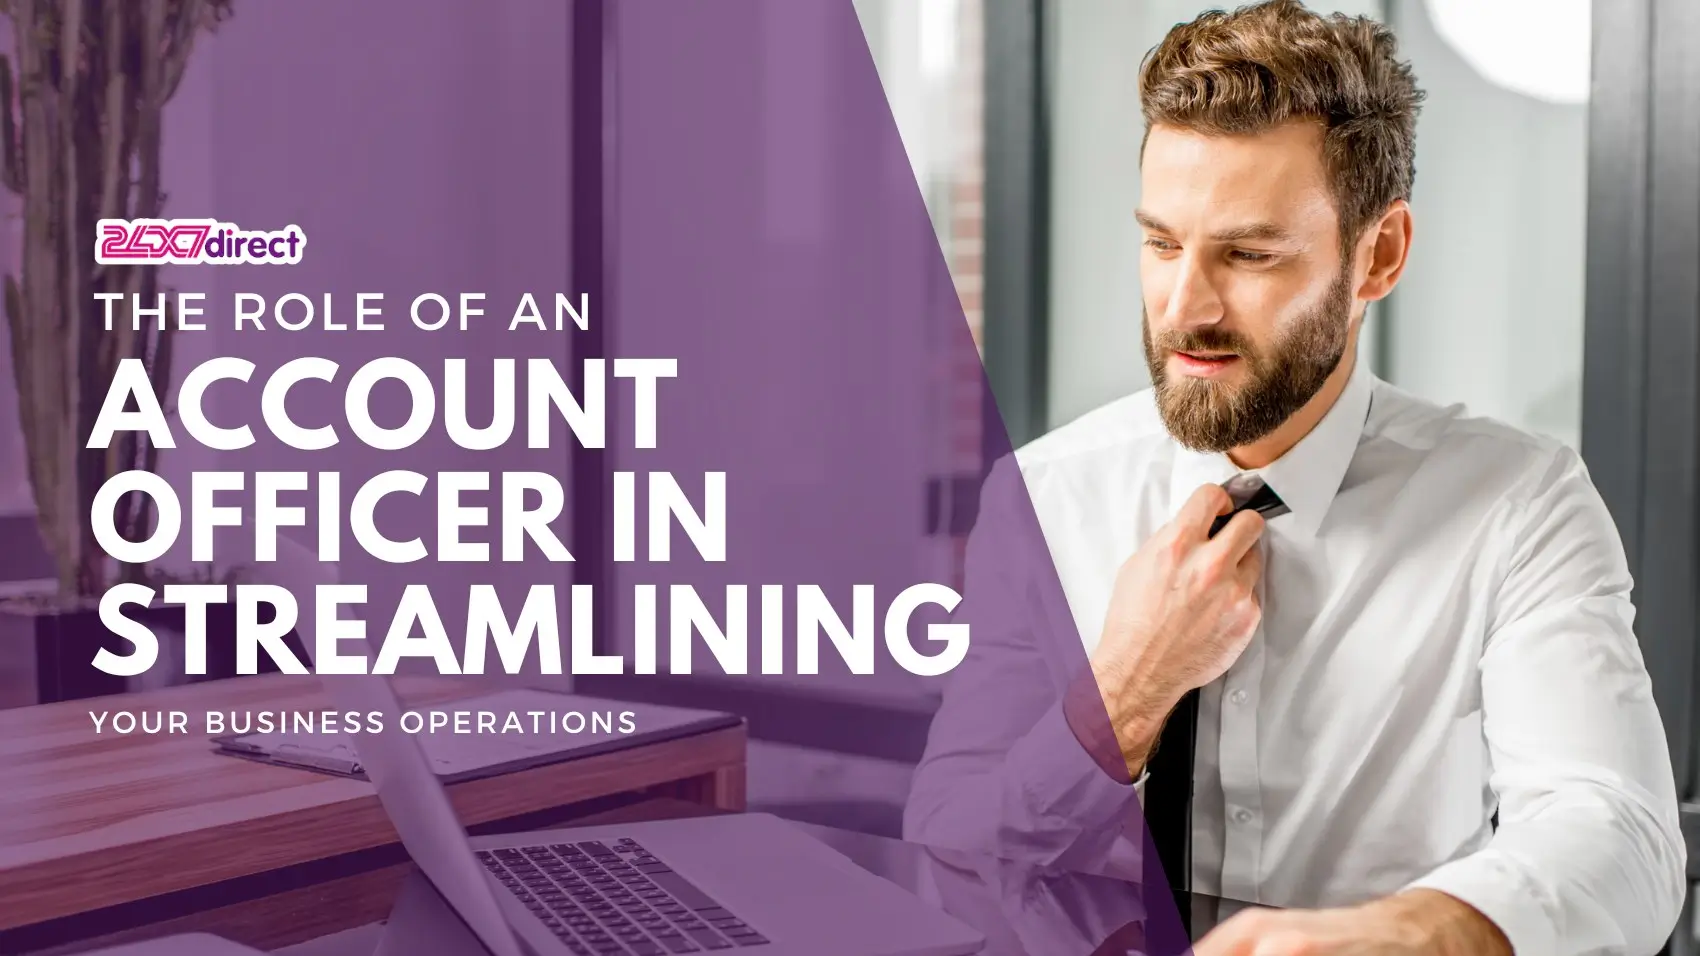 The Role of an Account Officer in Streamlining Your Business Operations